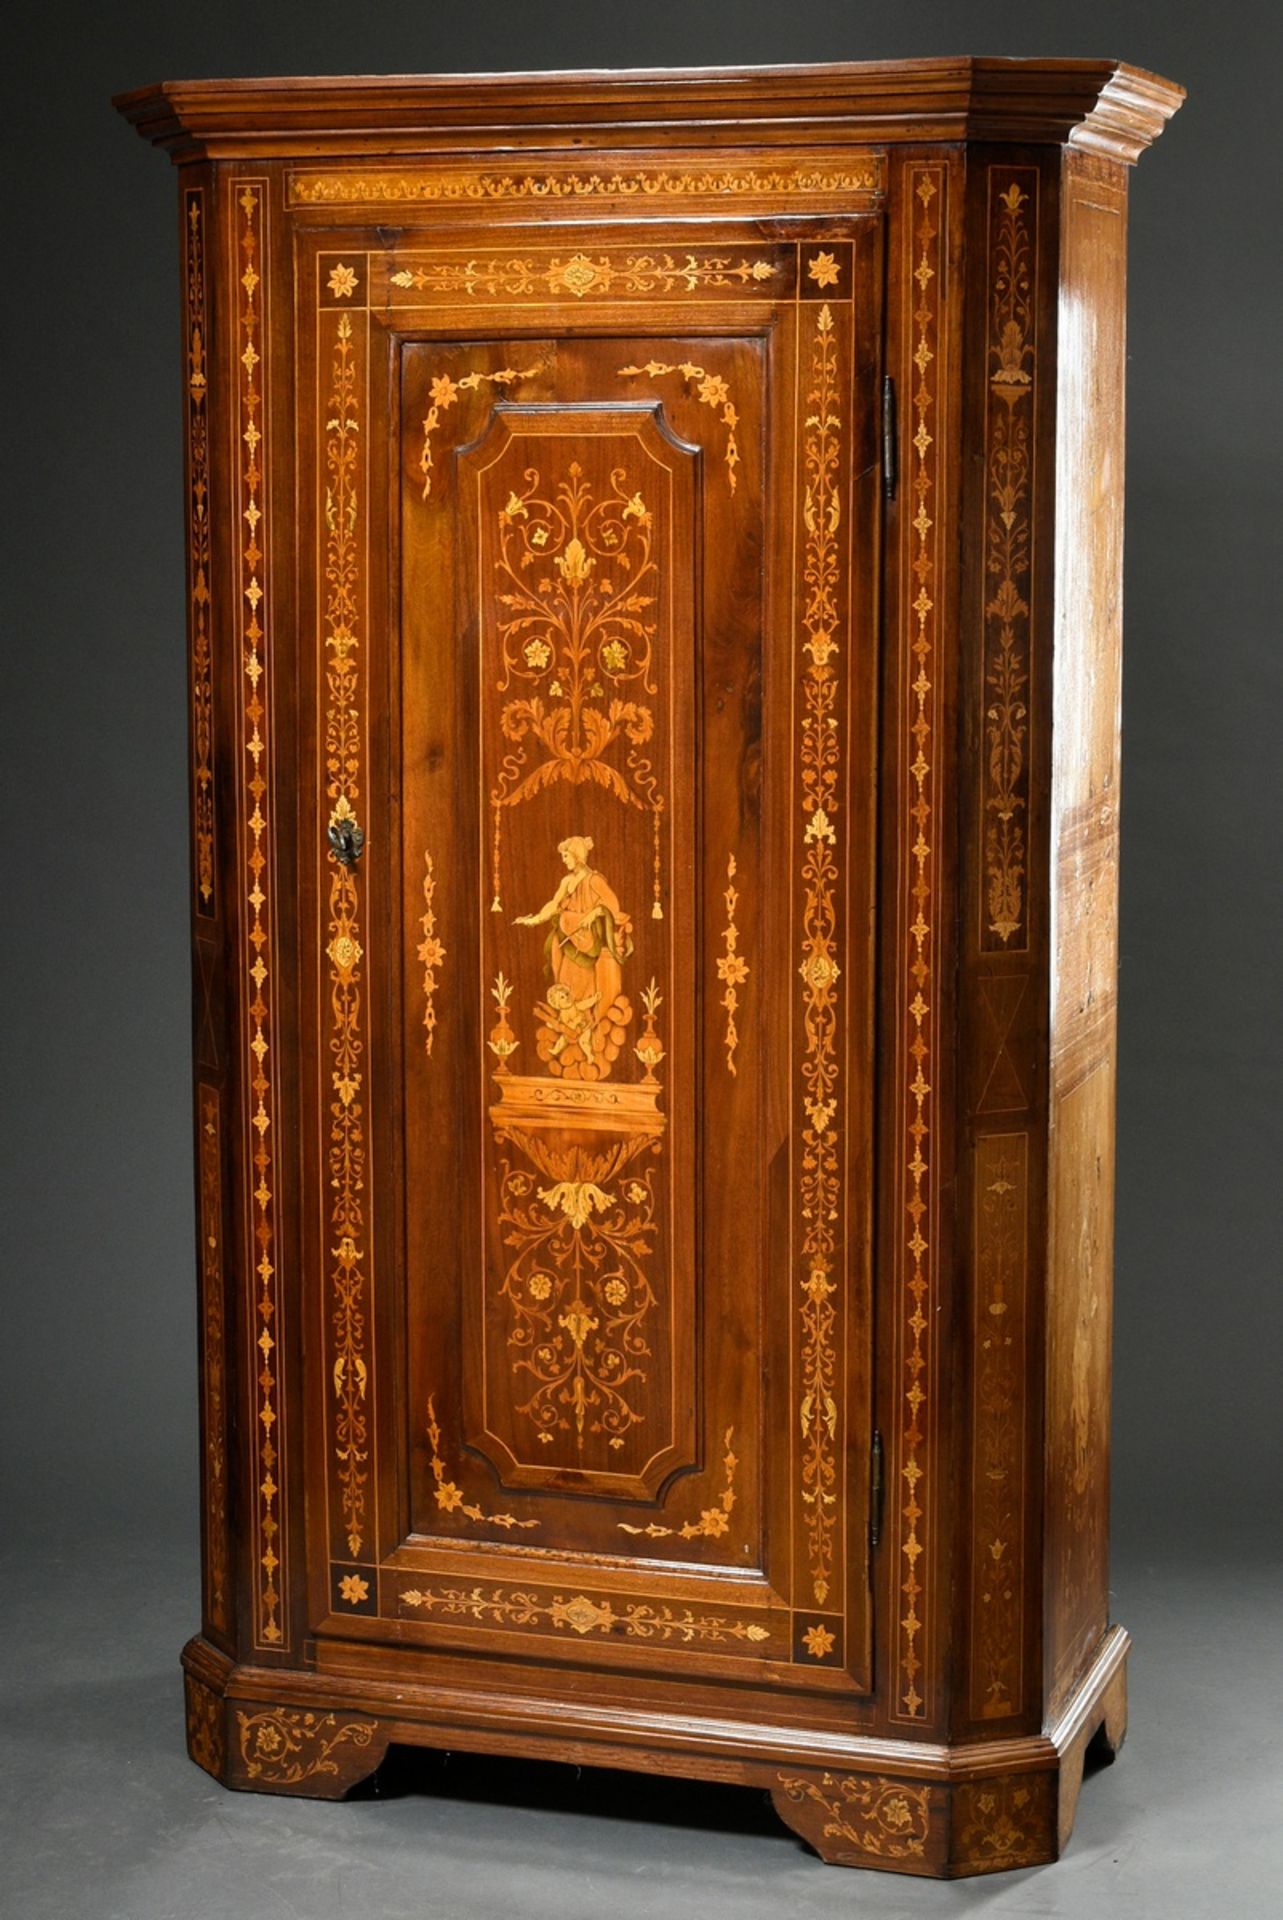 Splendid single-door cabinet with detailed inlays "Allegorical female figures" in classicistic orna